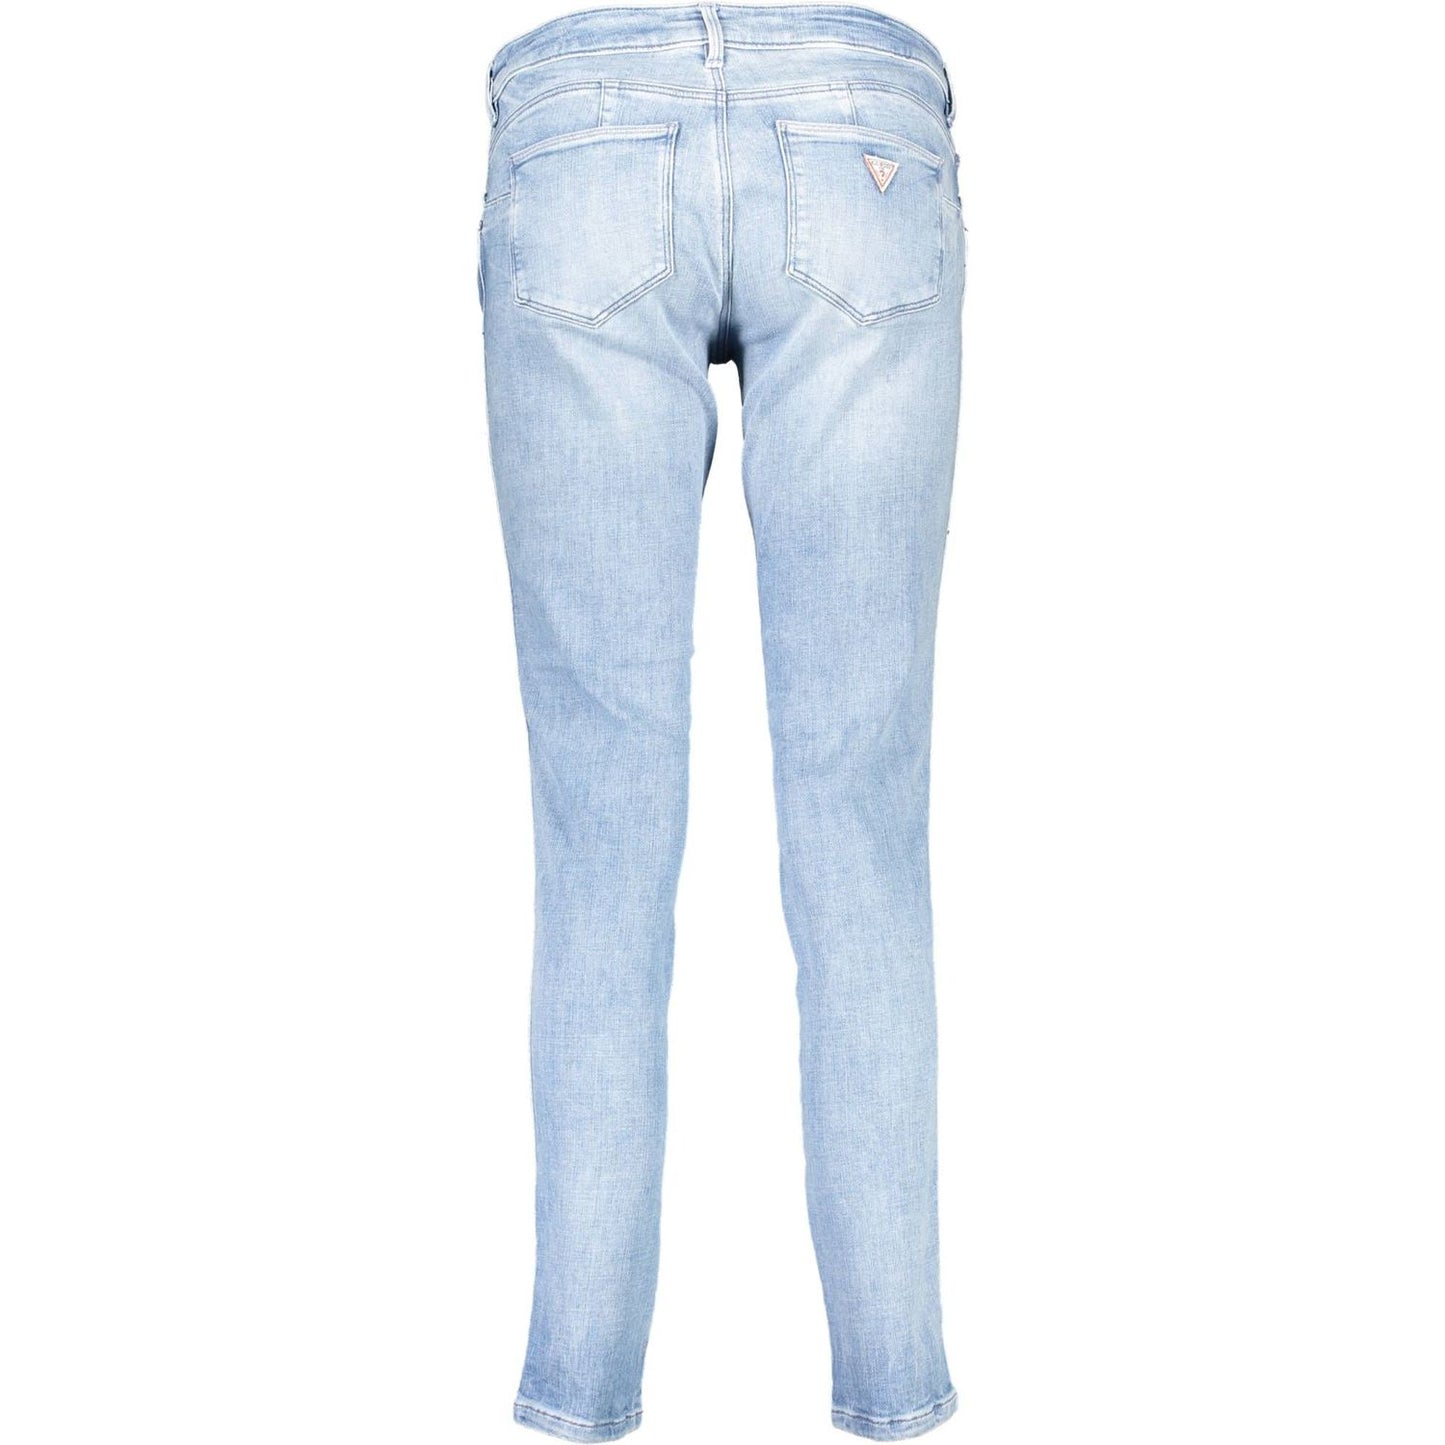 Guess Jeans Chic Skinny Mid-Rise Light Blue Jeans chic-skinny-mid-rise-light-blue-jeans